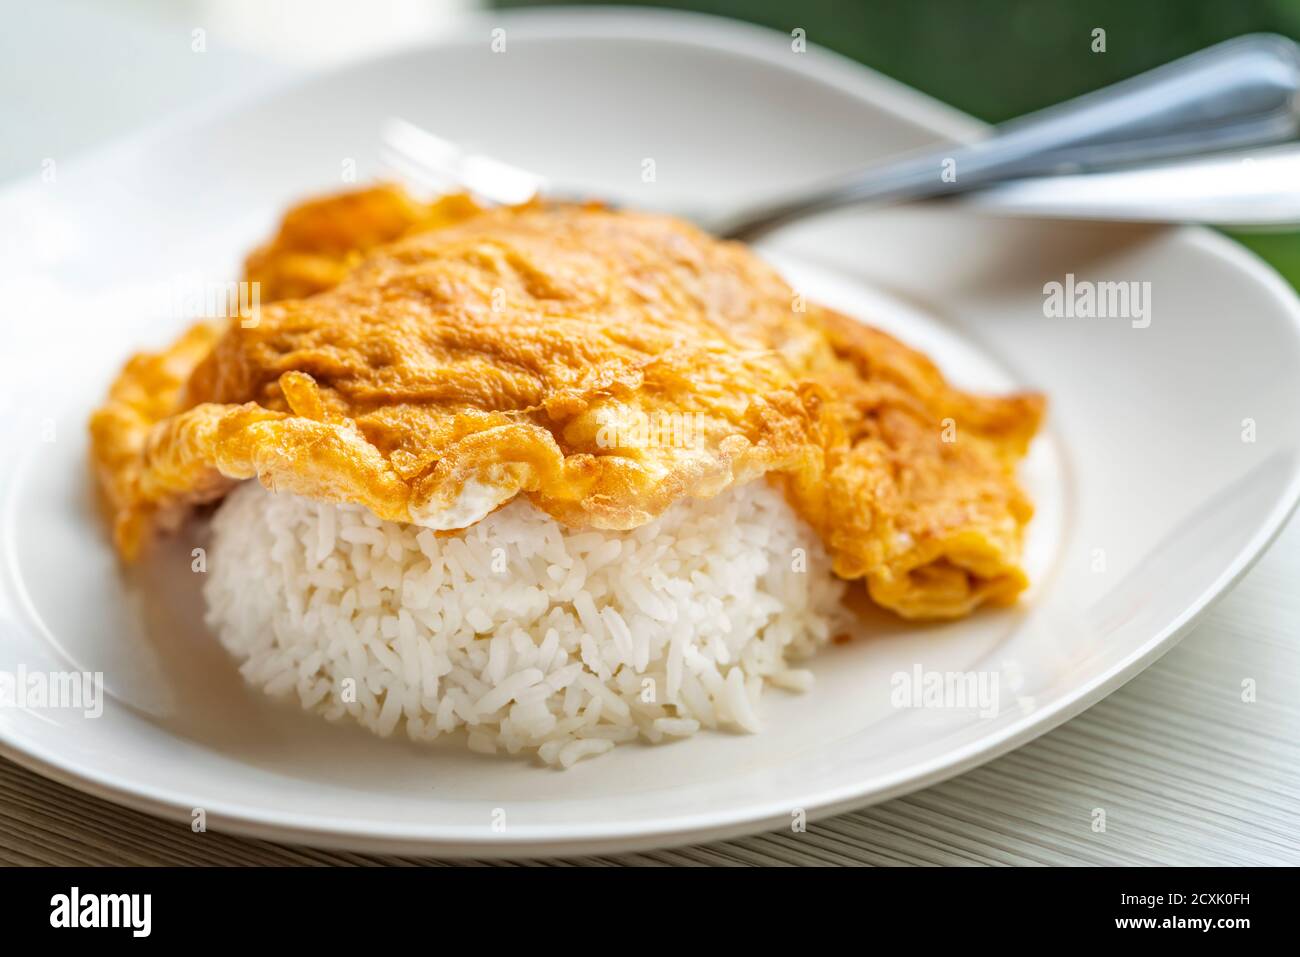 Easy Thai food menu, Thai omelette over rice or Kai Jeaw Rad Kow. Close up Thai omelette over white rice in white plate on table. Stock Photo